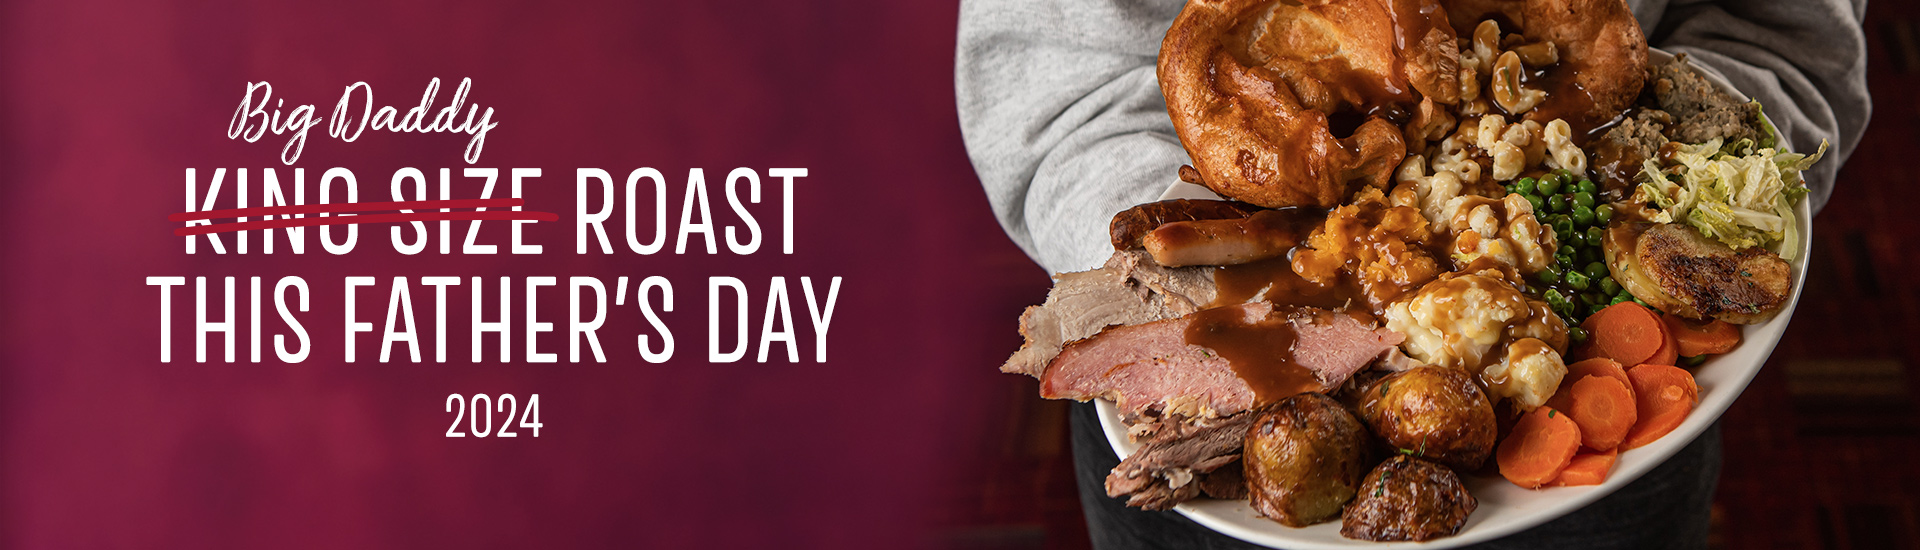 Father’s day carvery in Leeds, Father’s day at Toby Carvery Chapel Allerton